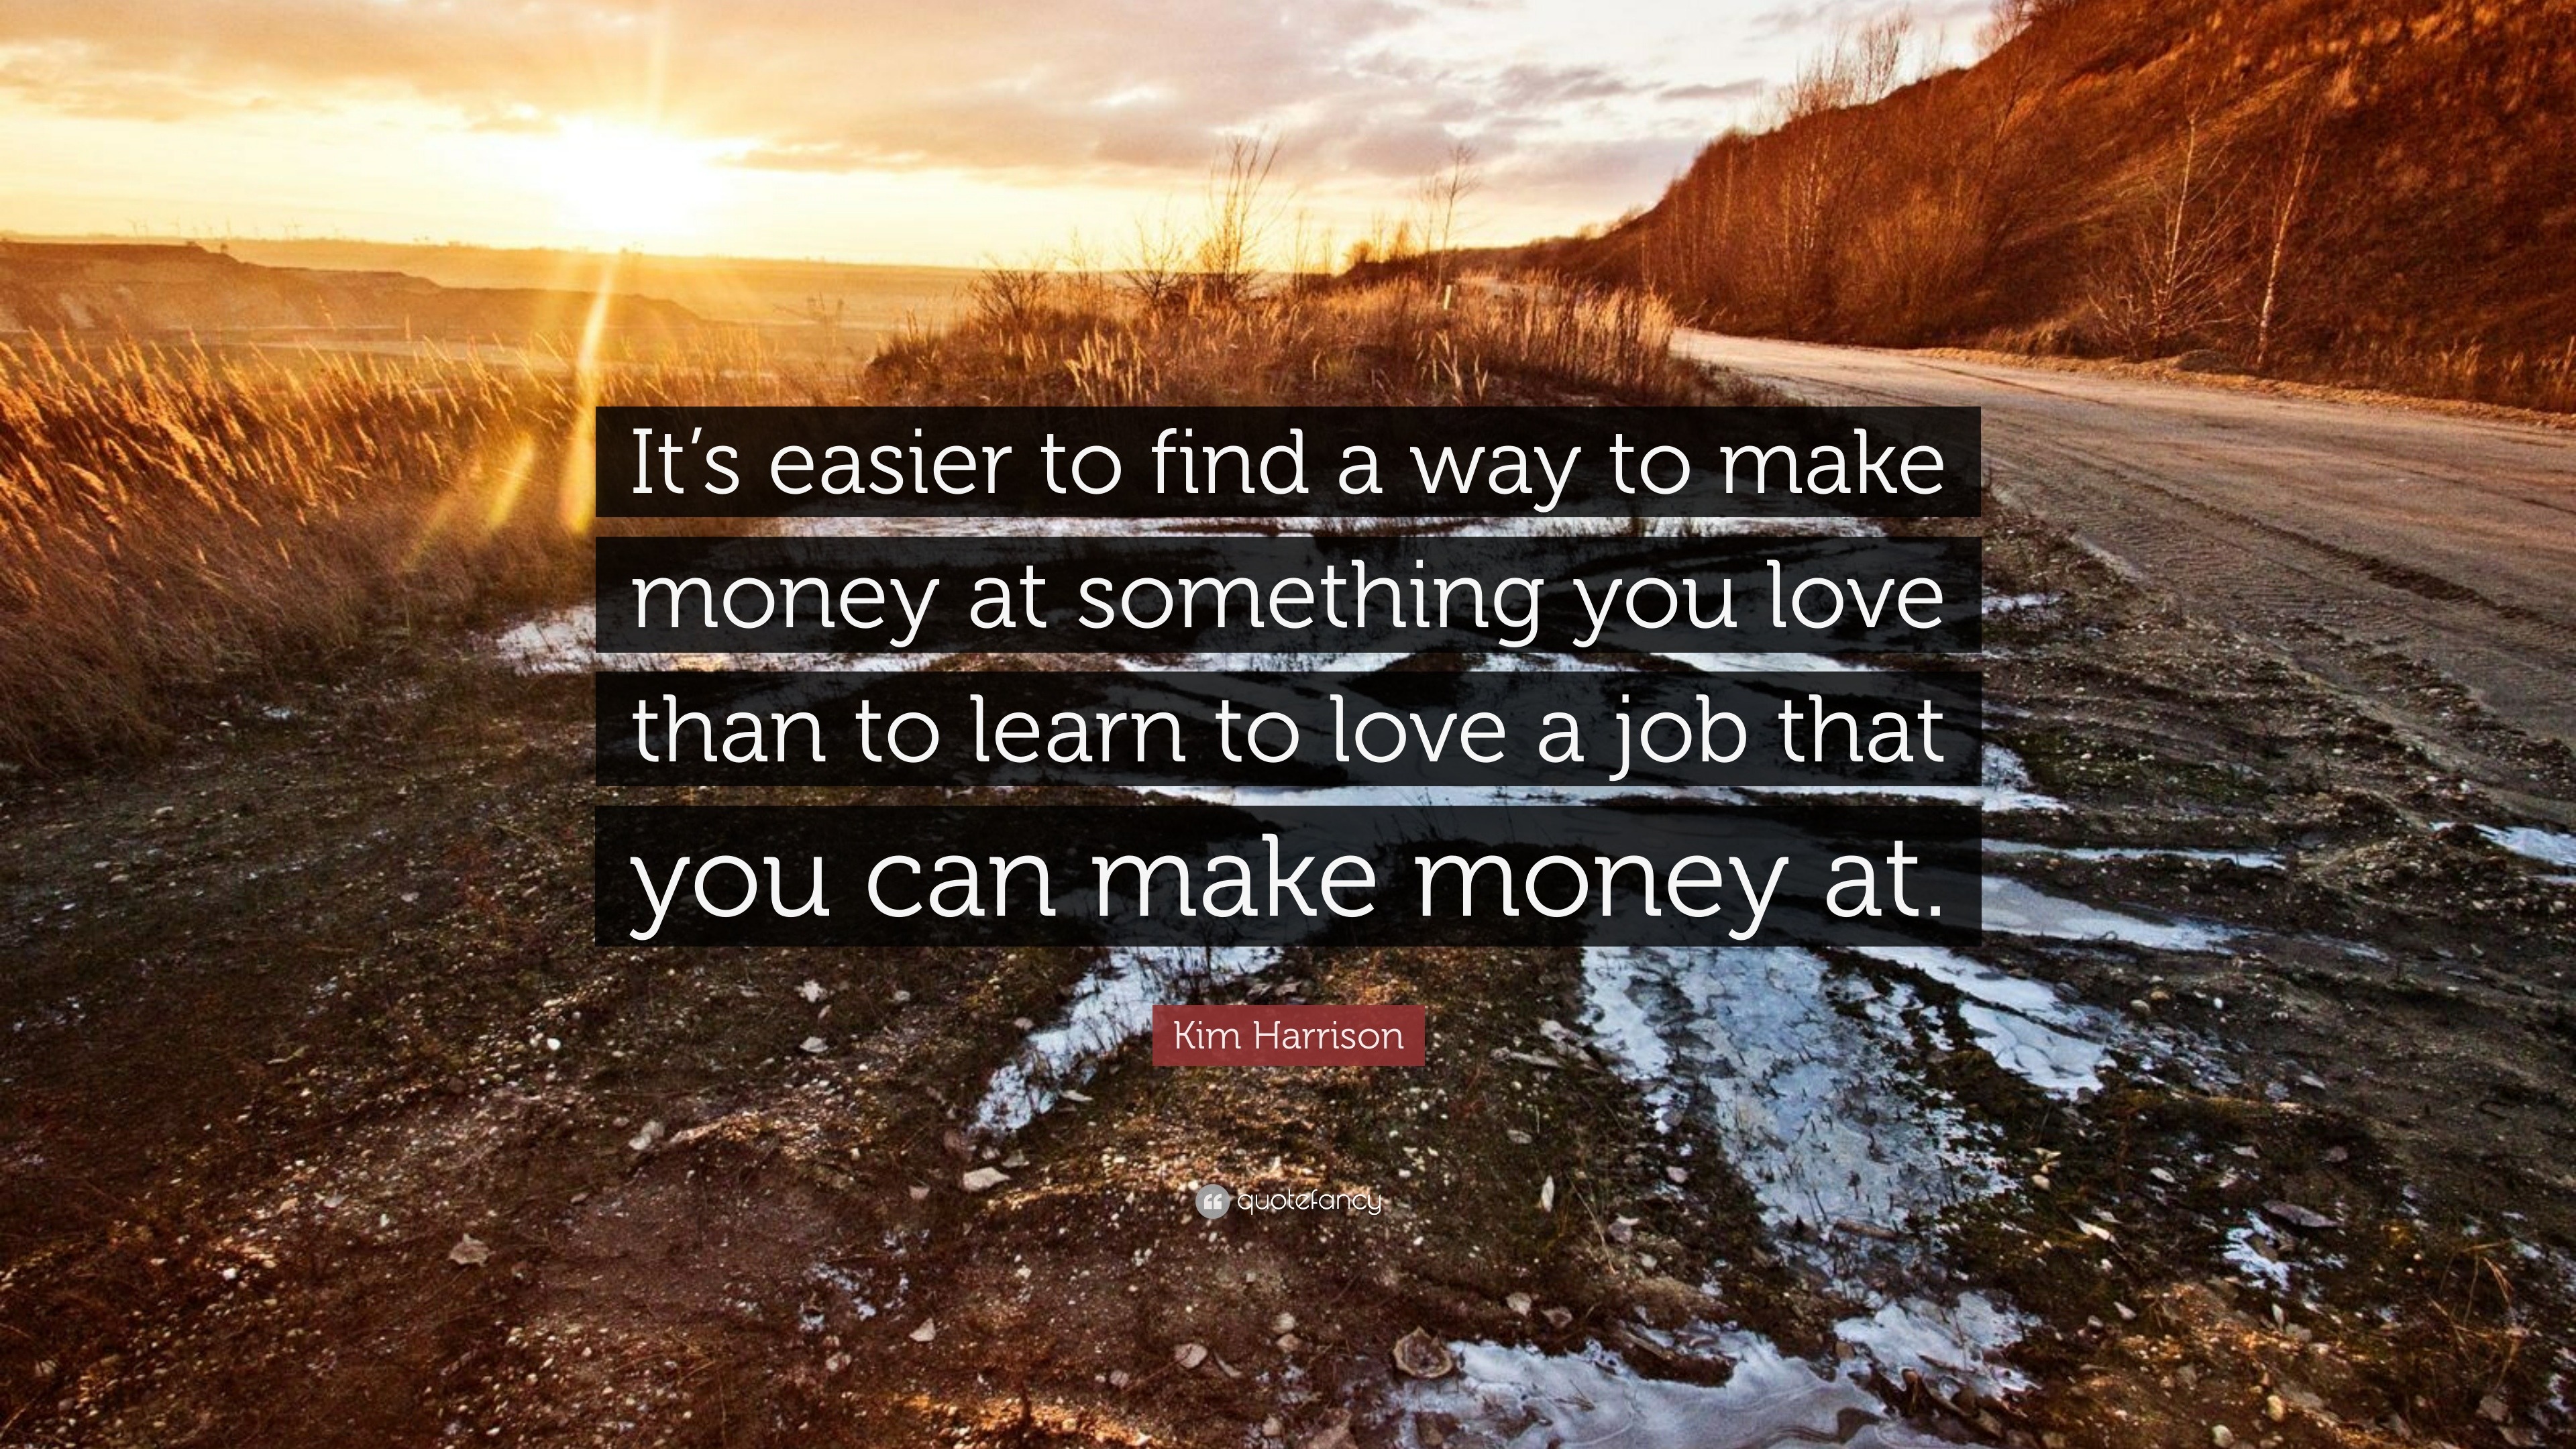 Kim Harrison Quote: “It’s easier to find a way to make money at ...